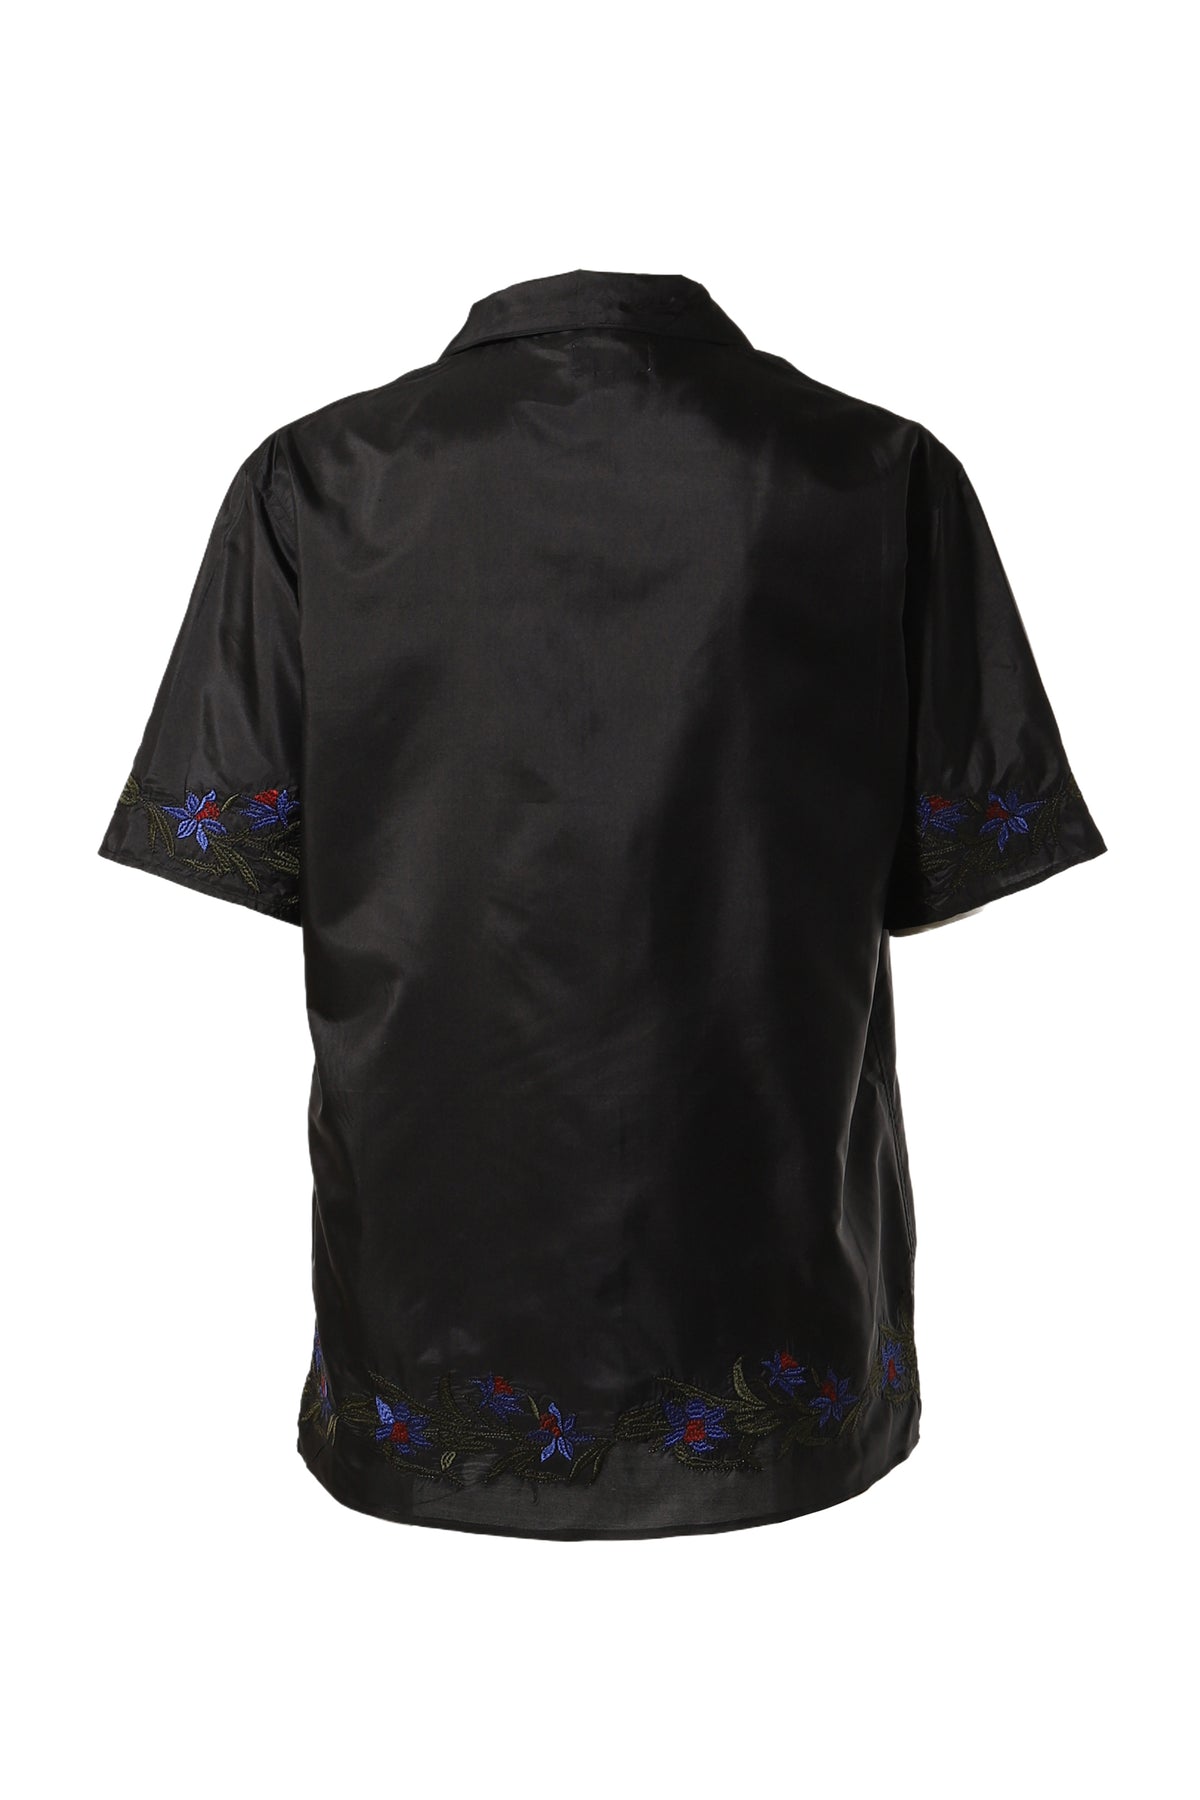 EMBROIDERY SHIRT / BLK